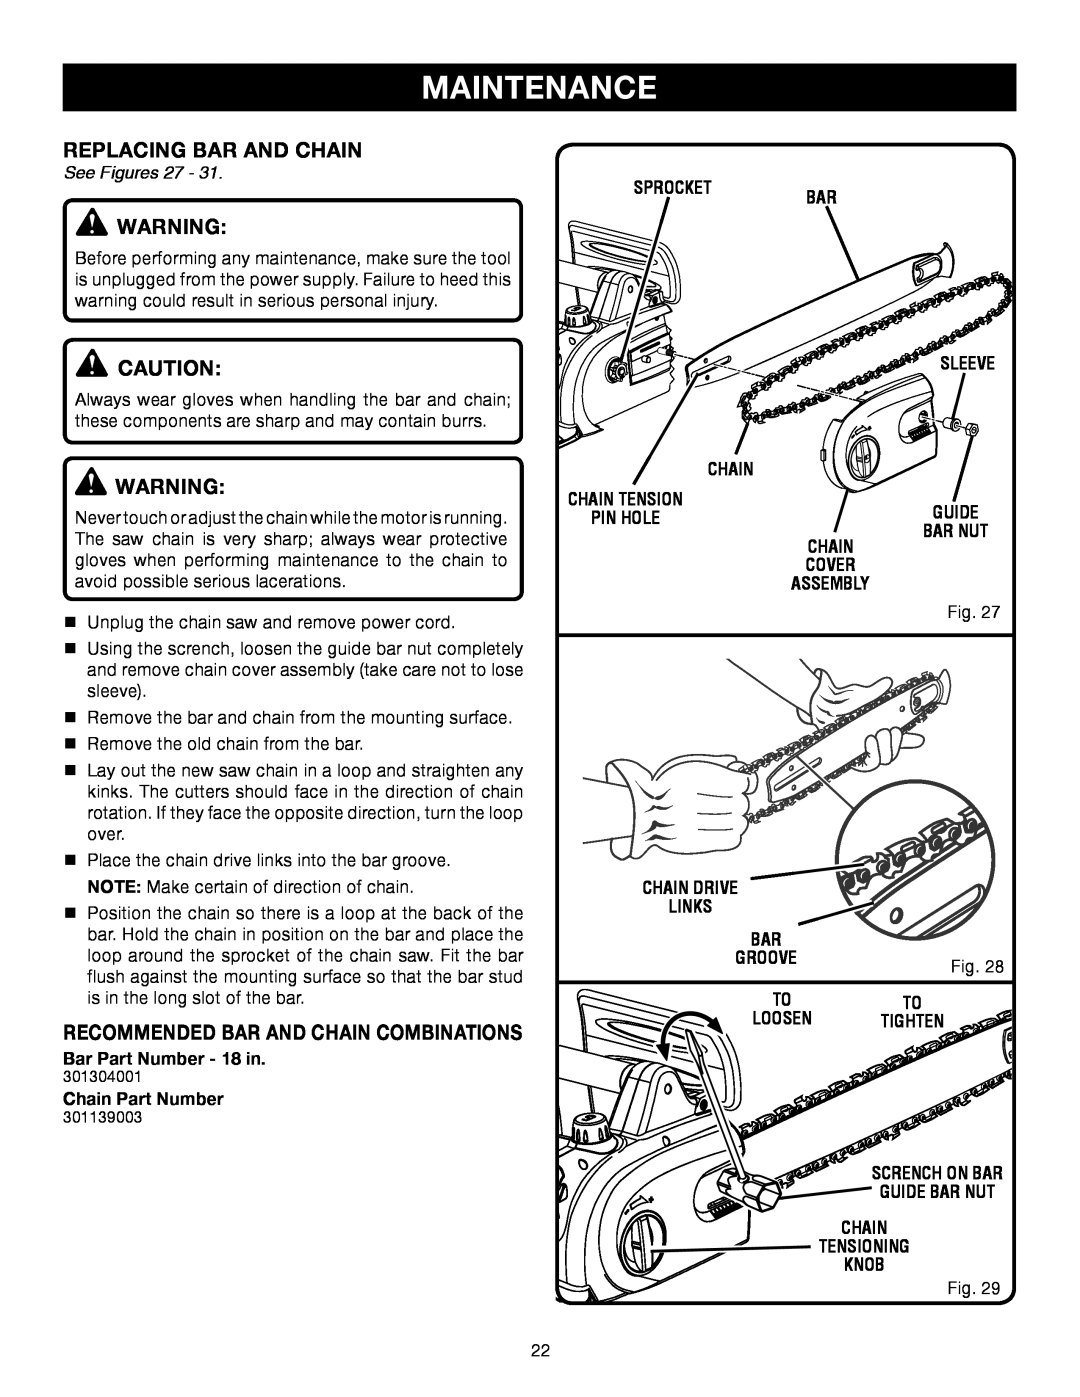 Ryobi RY43006 Replacing Bar And Chain, Maintenance, Recommended Bar And Chain Combinations, See Figures, Chain Part Number 